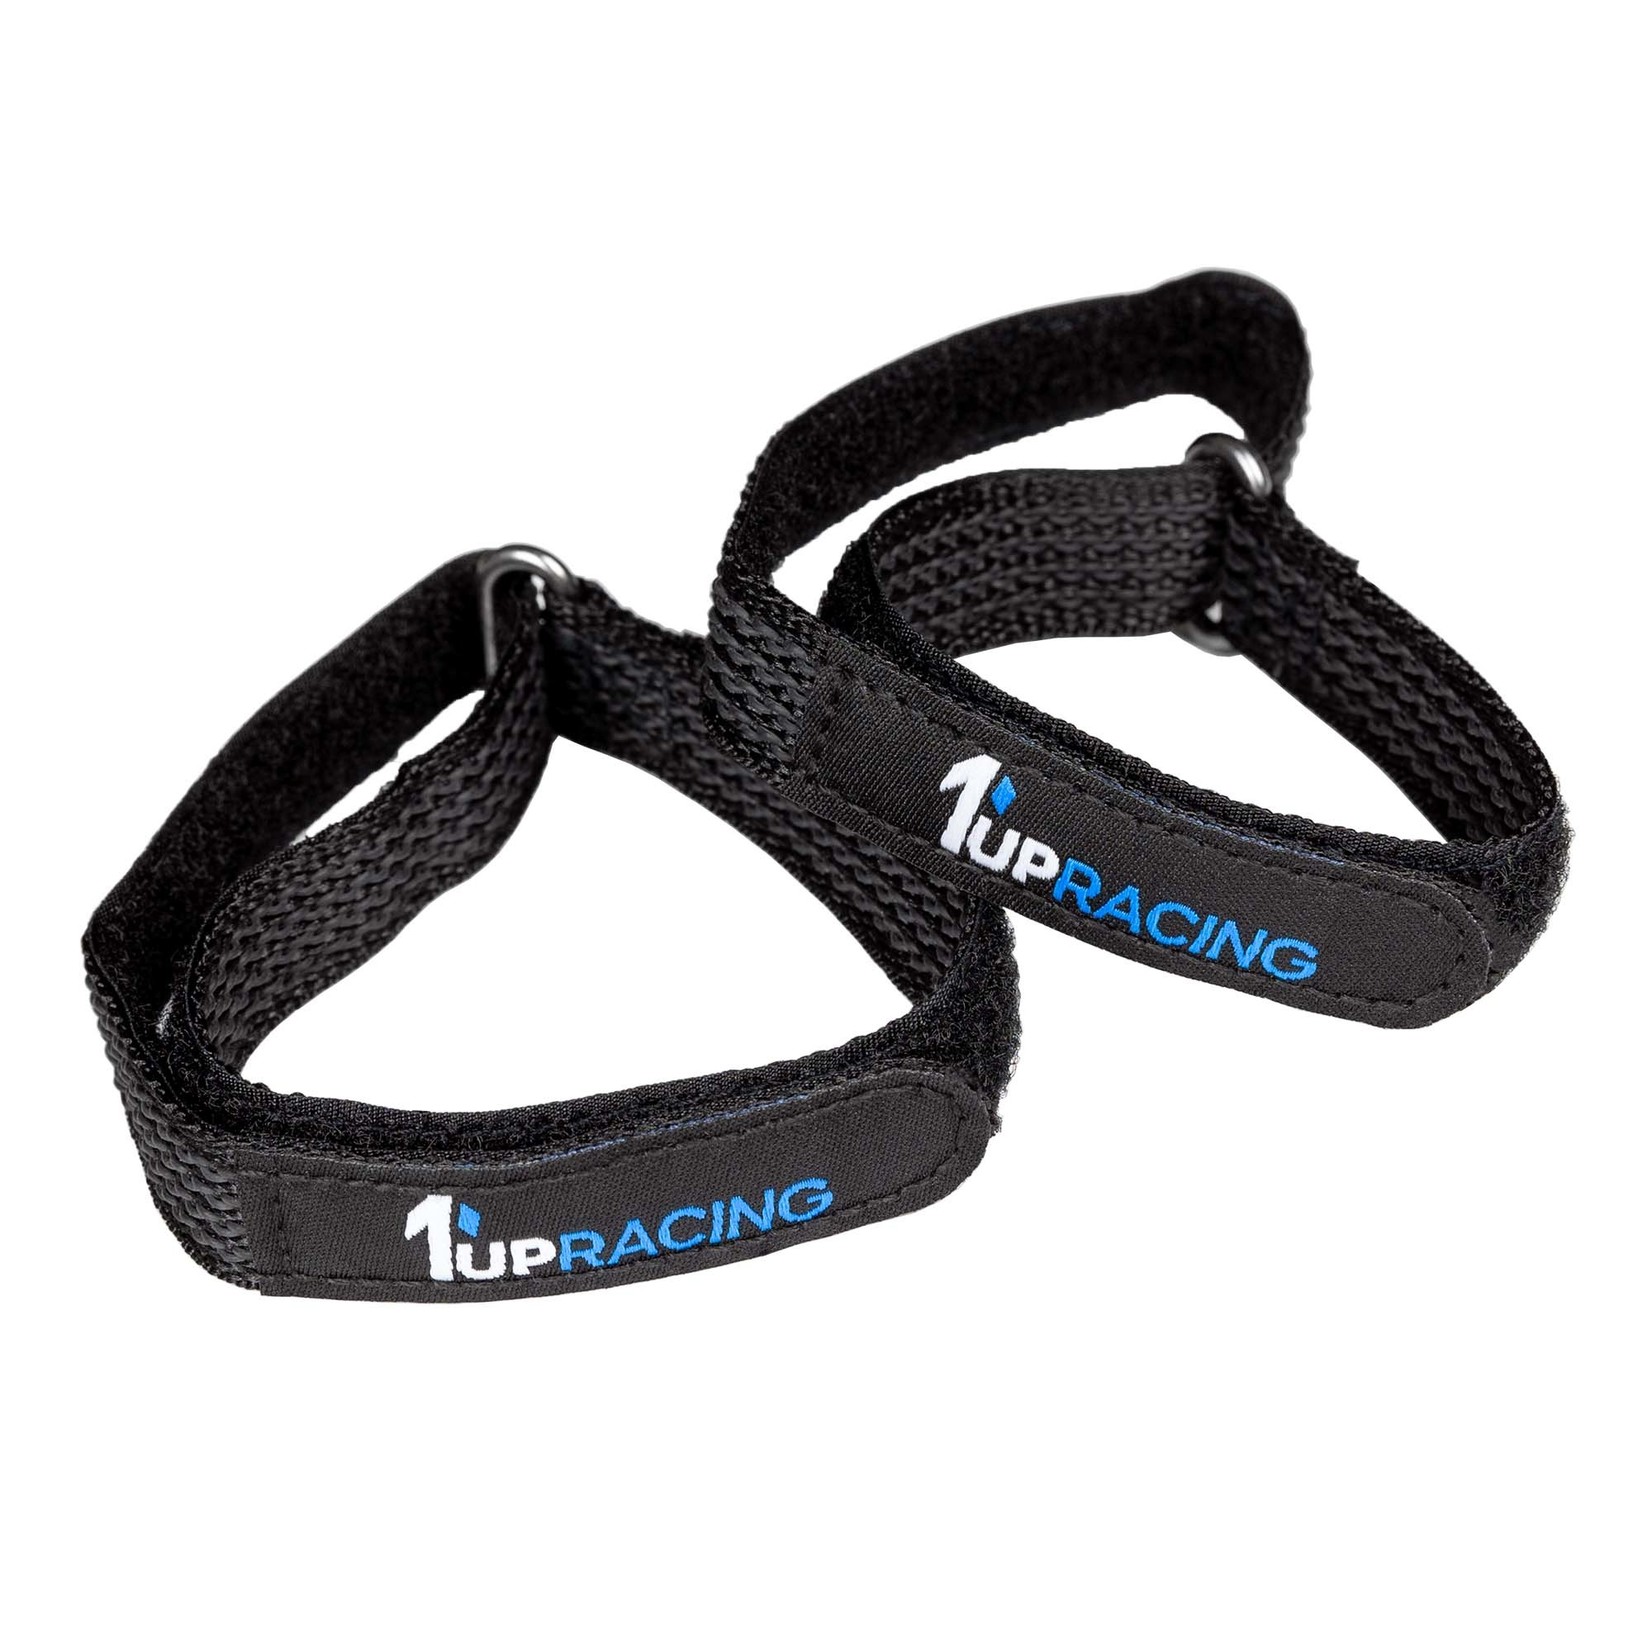 1UP Racing Lockdown Tire Gluing Straps, 2pcs